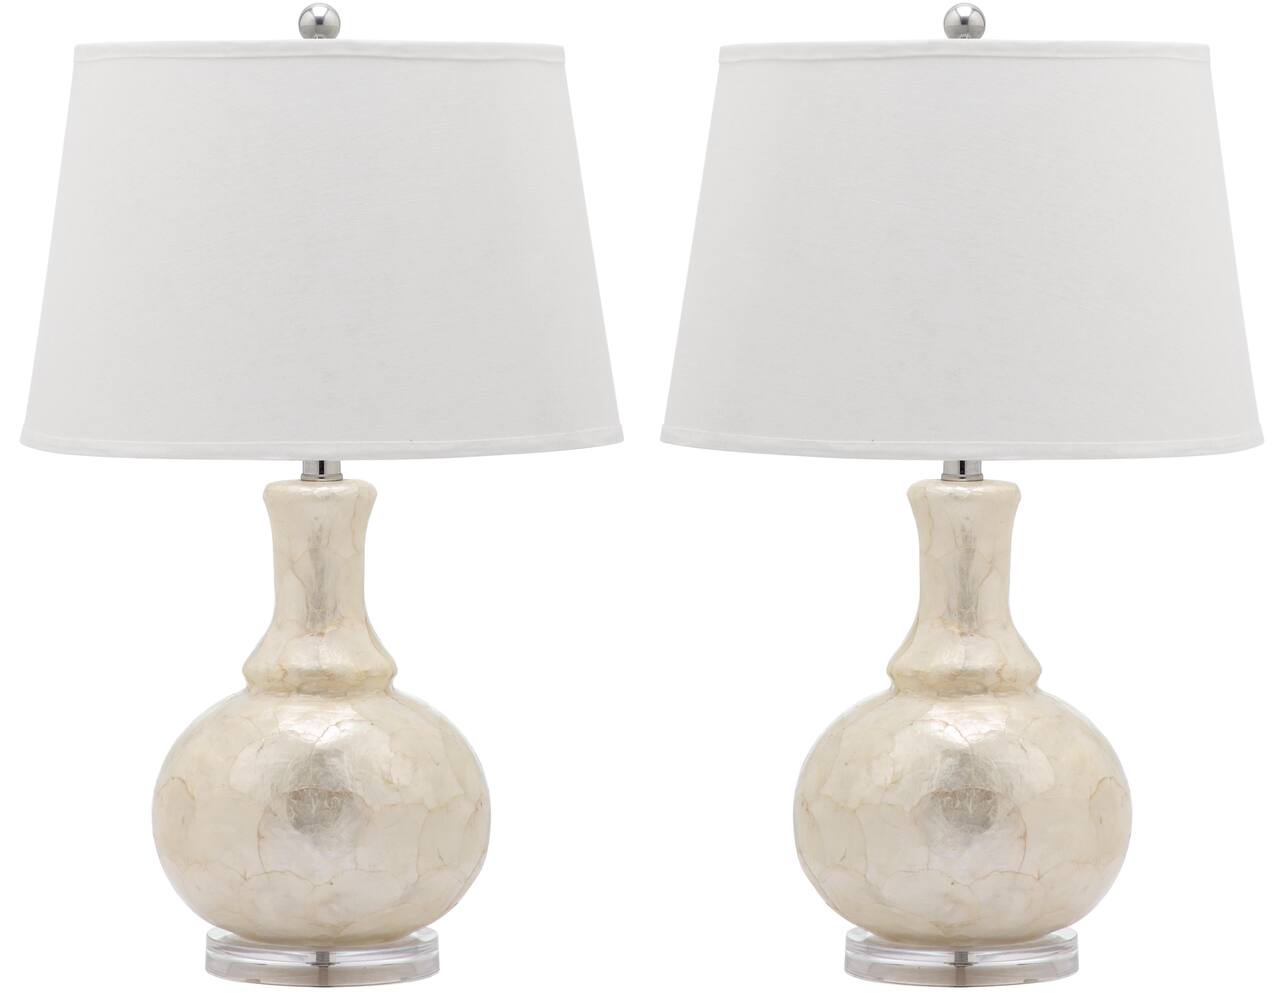 Shelley Gourd Table Lamp Set in White